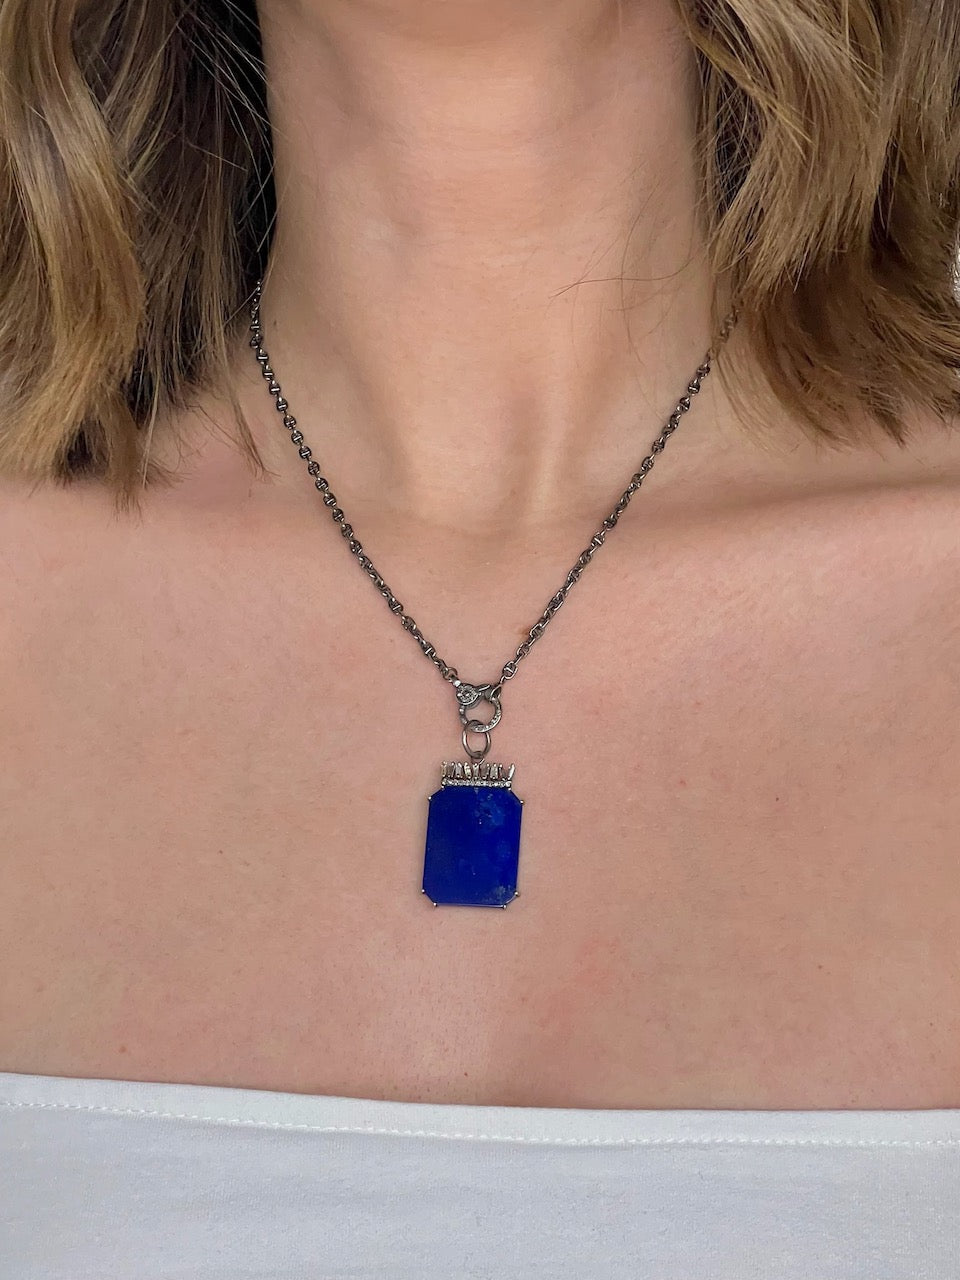 Pave and Baguette Diamonds over Lapis